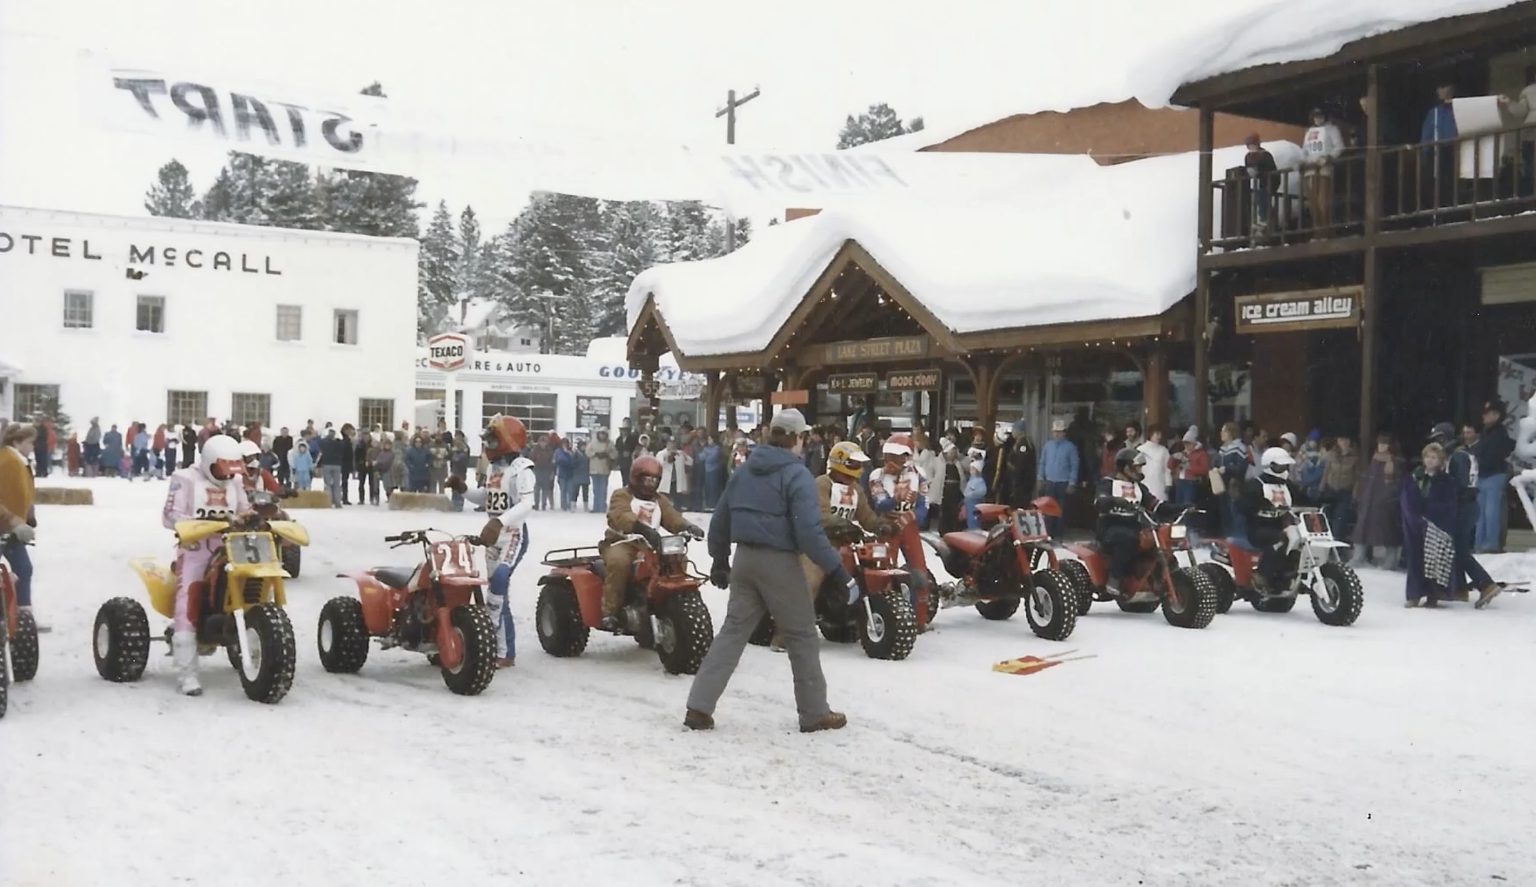 People line up on three-wheeler ATVs for a race in the snow.